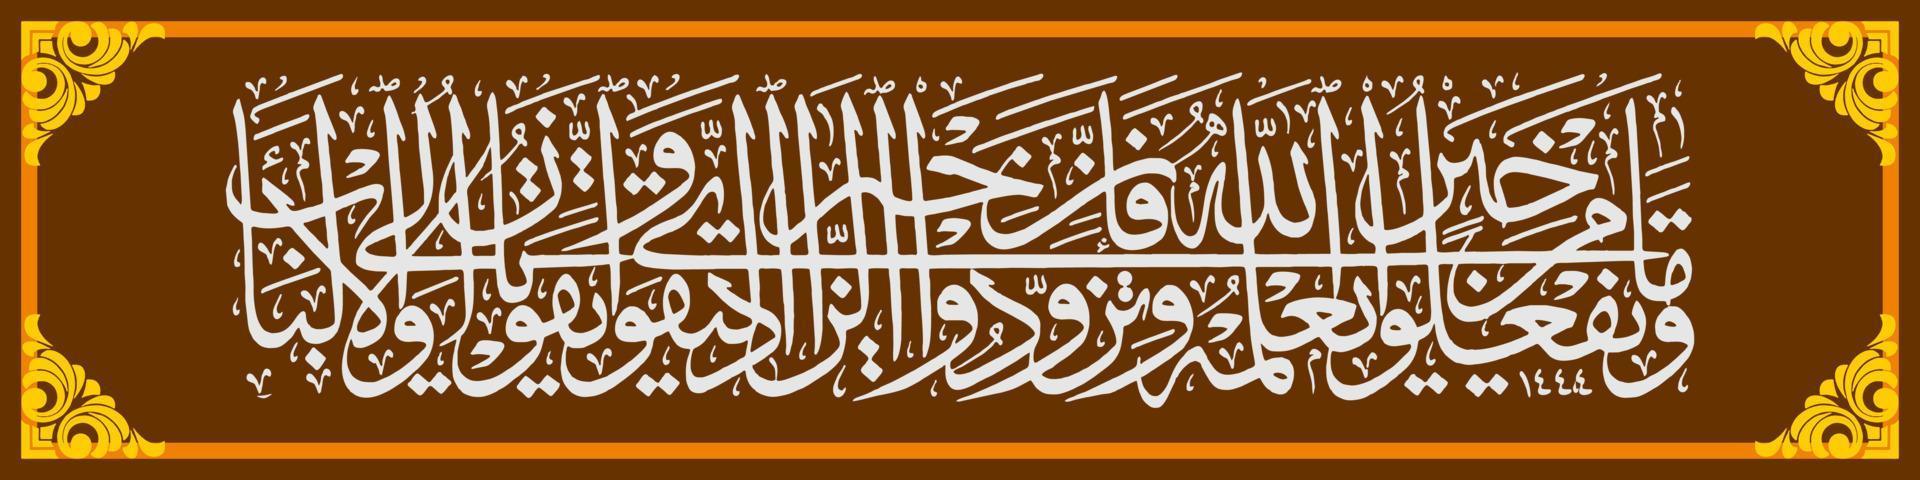 Arabic Calligraphy, Al Qur'an Surah Al Baqarah 197, Translation Everything good that you do, Allah knows it. Bring provisions, because actually the best provision is piety. And fear Me, vector